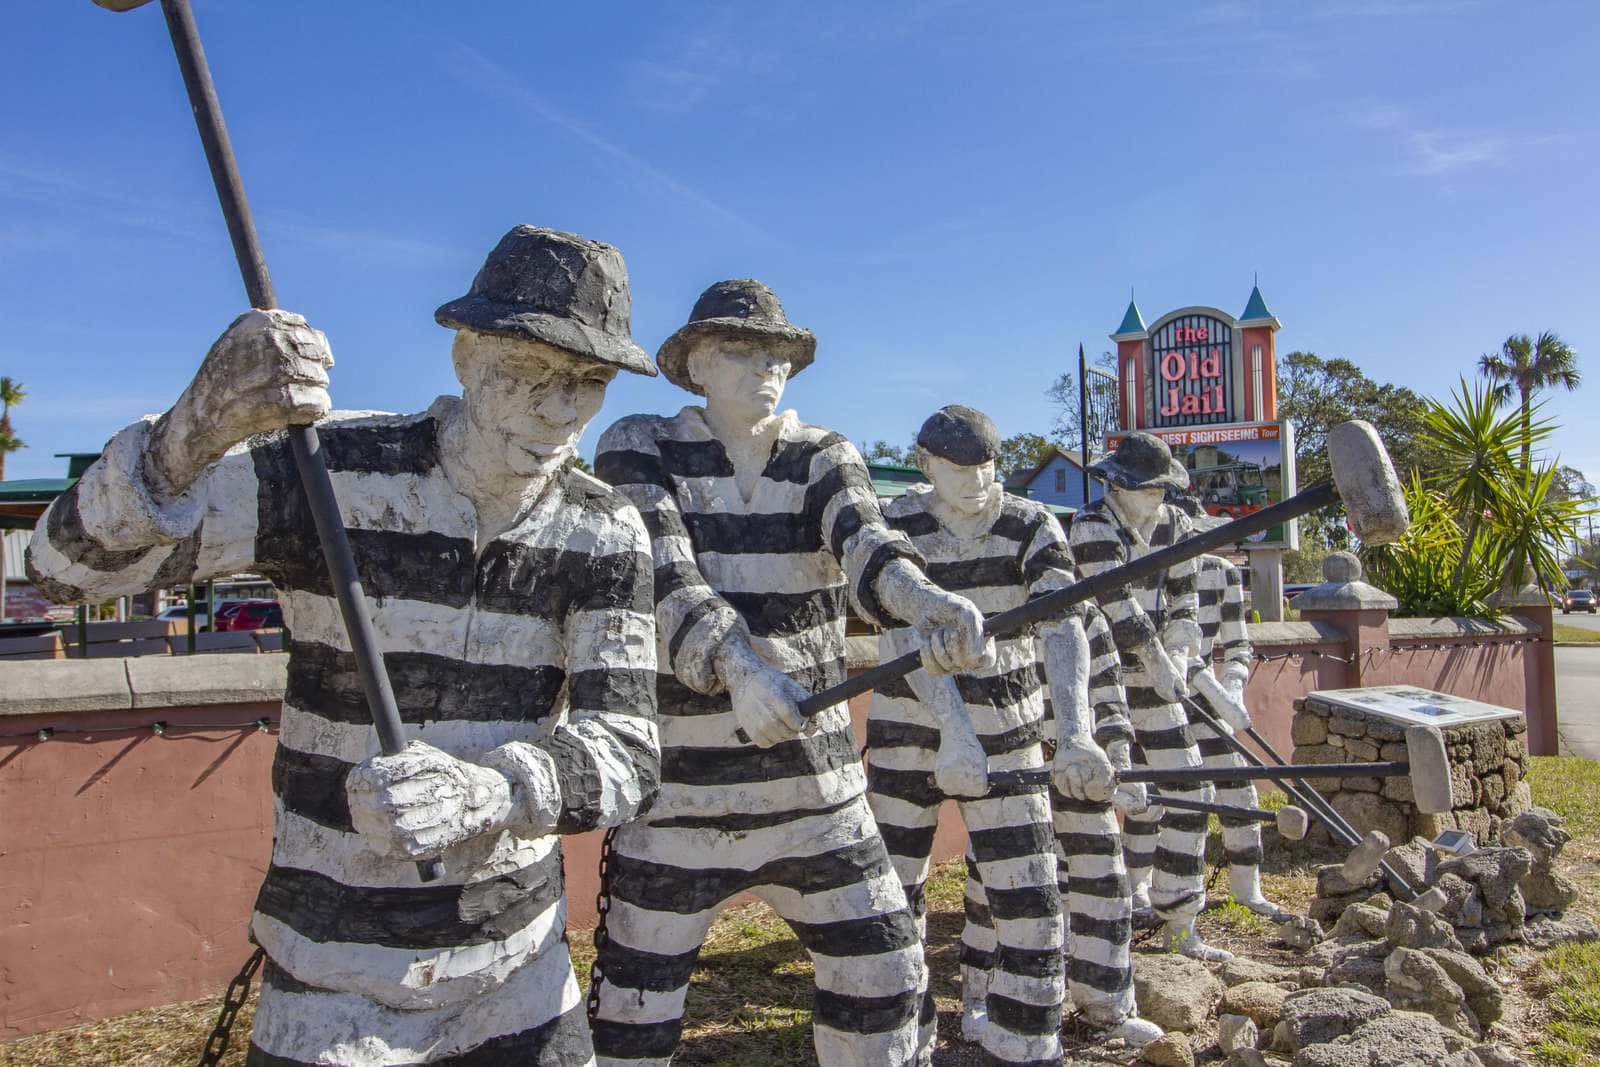 A Group Of Statues Of Prisoners Standing In Front Of A Building